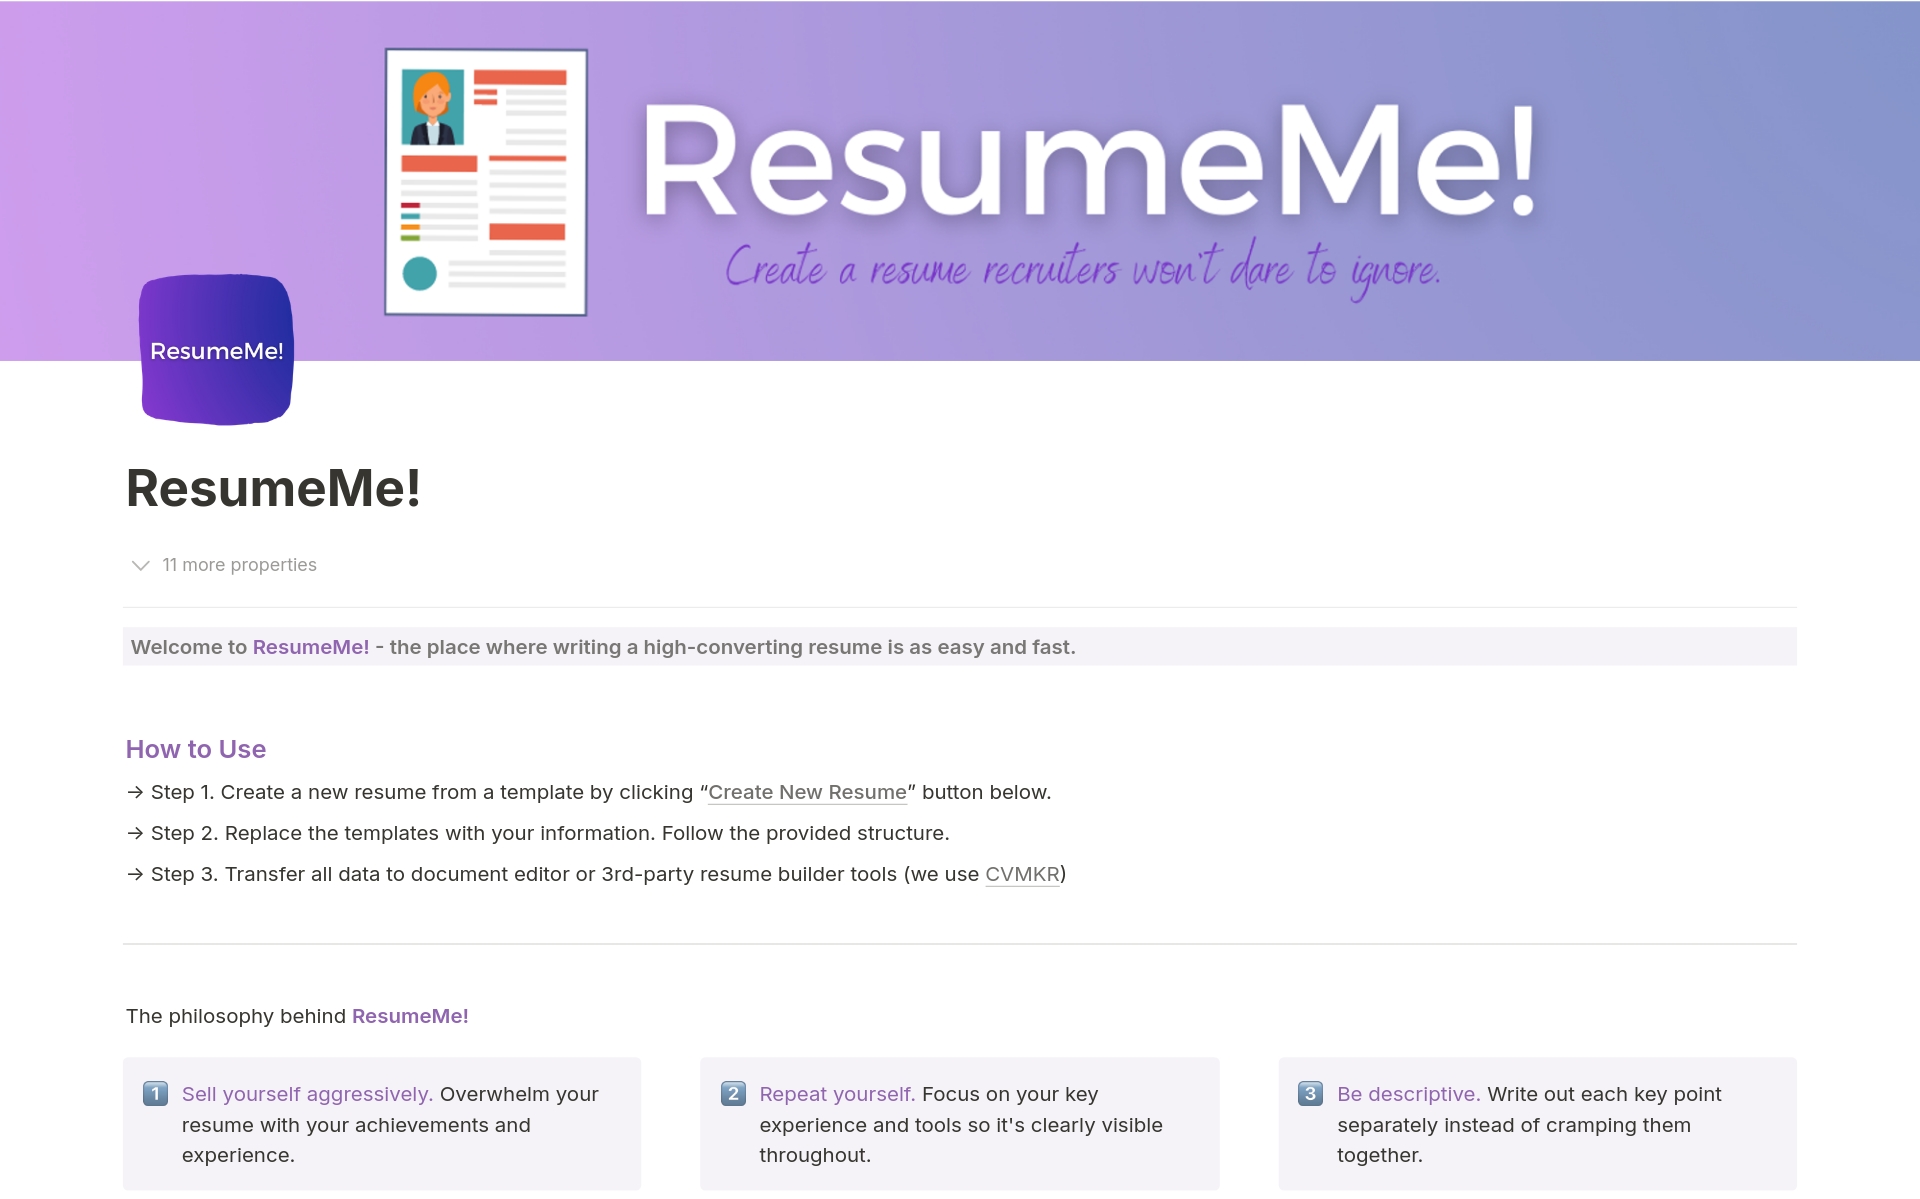 Looking for a job? Need a better resume? Let ResumeMe! help you out. Our professional resume template will help you write a high-converting resume that will stand out from the crowd.
